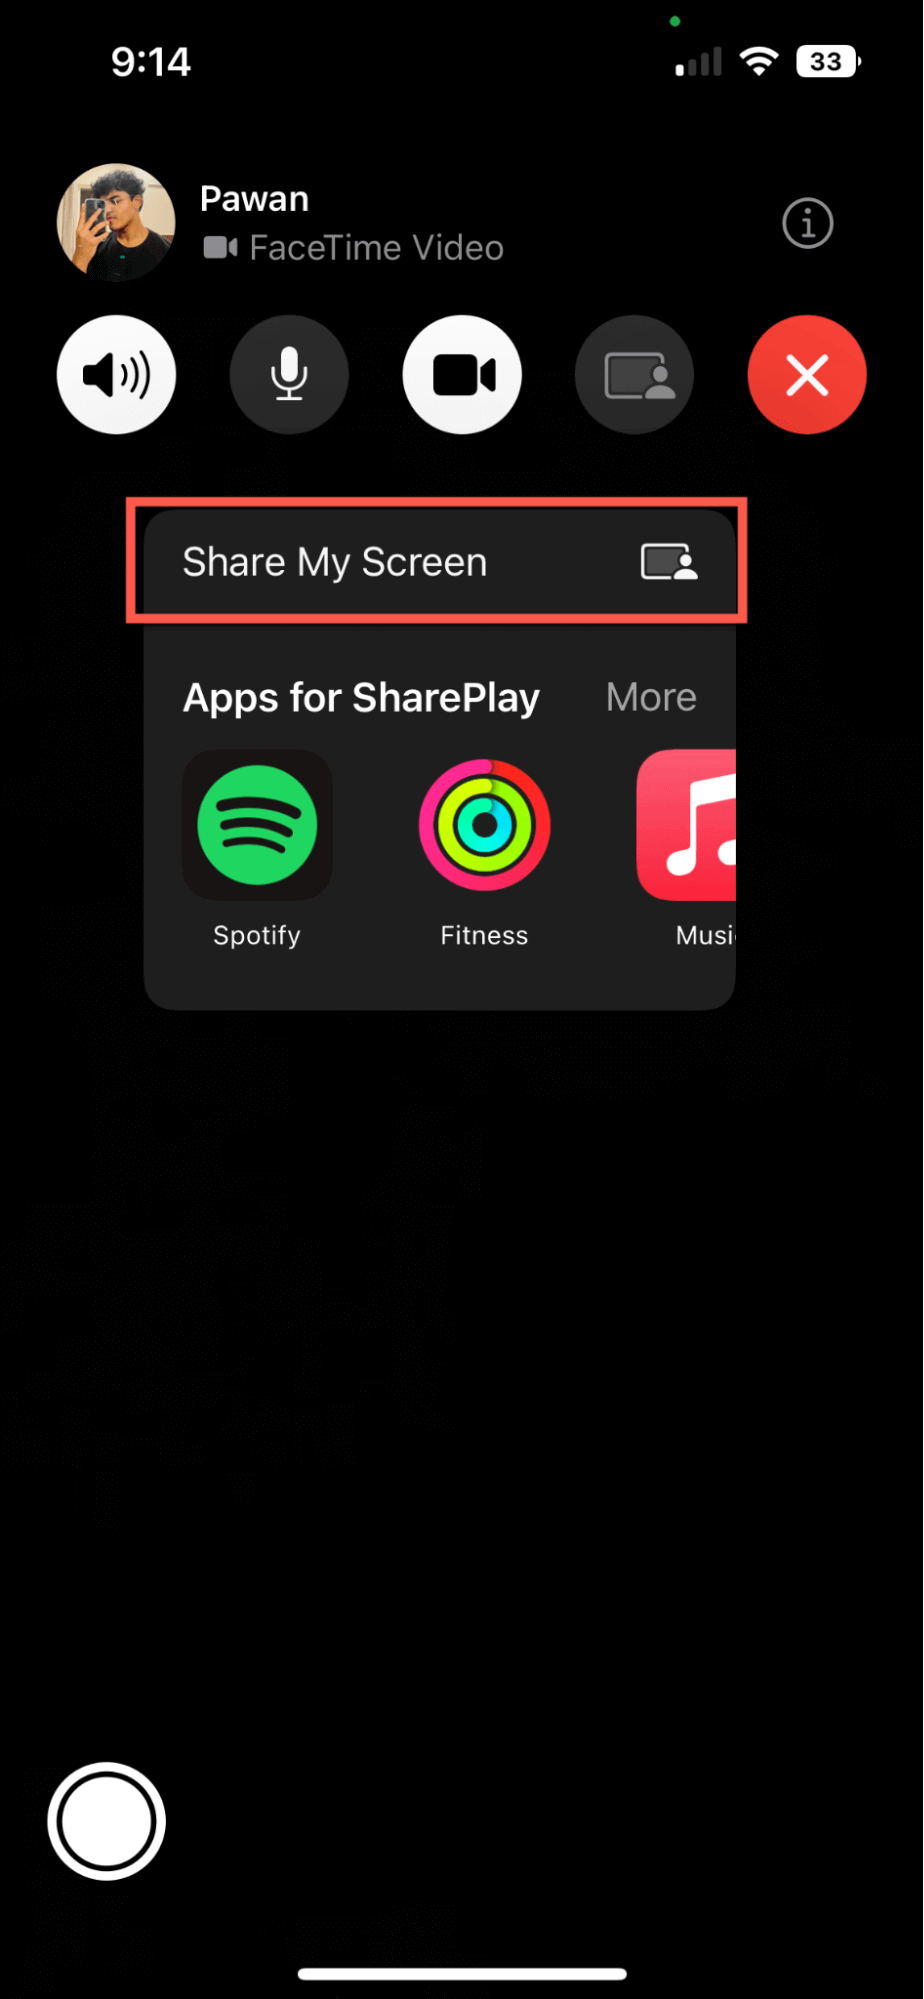 Select the Share My Screen option